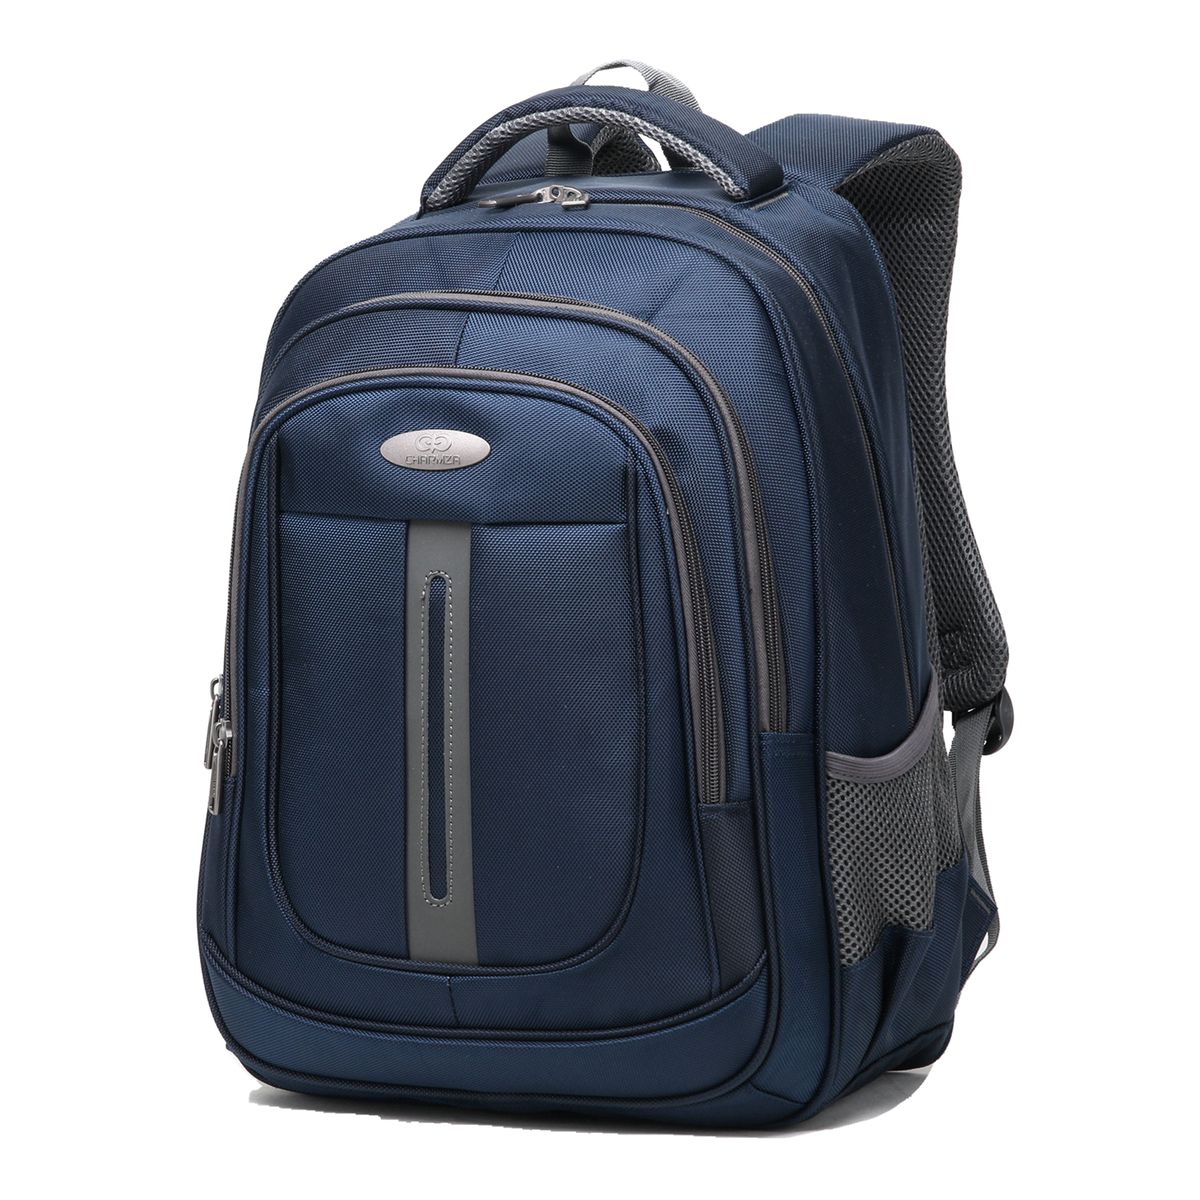 Charmza Rapide Laptop Bag - Navy | Buy Online in South Africa ...